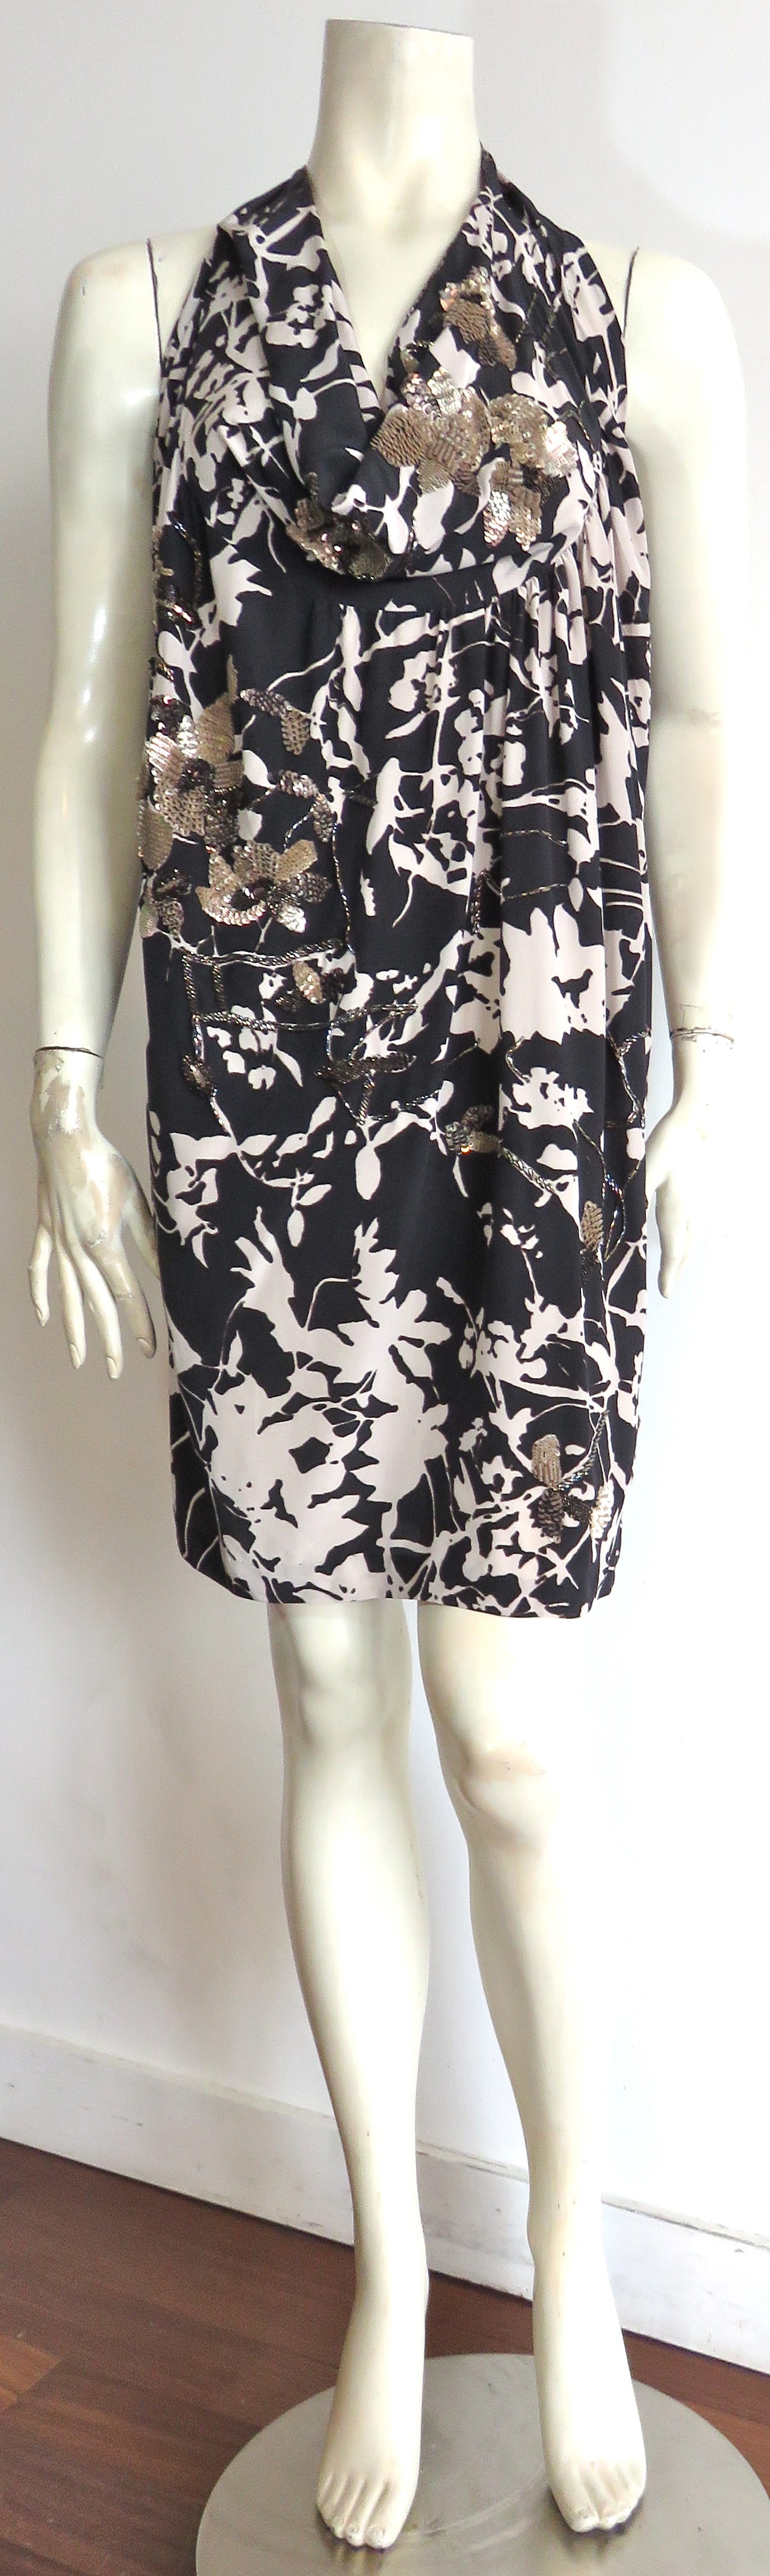 Never worn, DRIES VAN NOTEN, embellished silk floral print dress.

Stunning, two-tone style, floral printed artwork in black and white with gray outlines.  

The dress is gorgeously embellished with matte-golden, as well as deep bronze sequins,